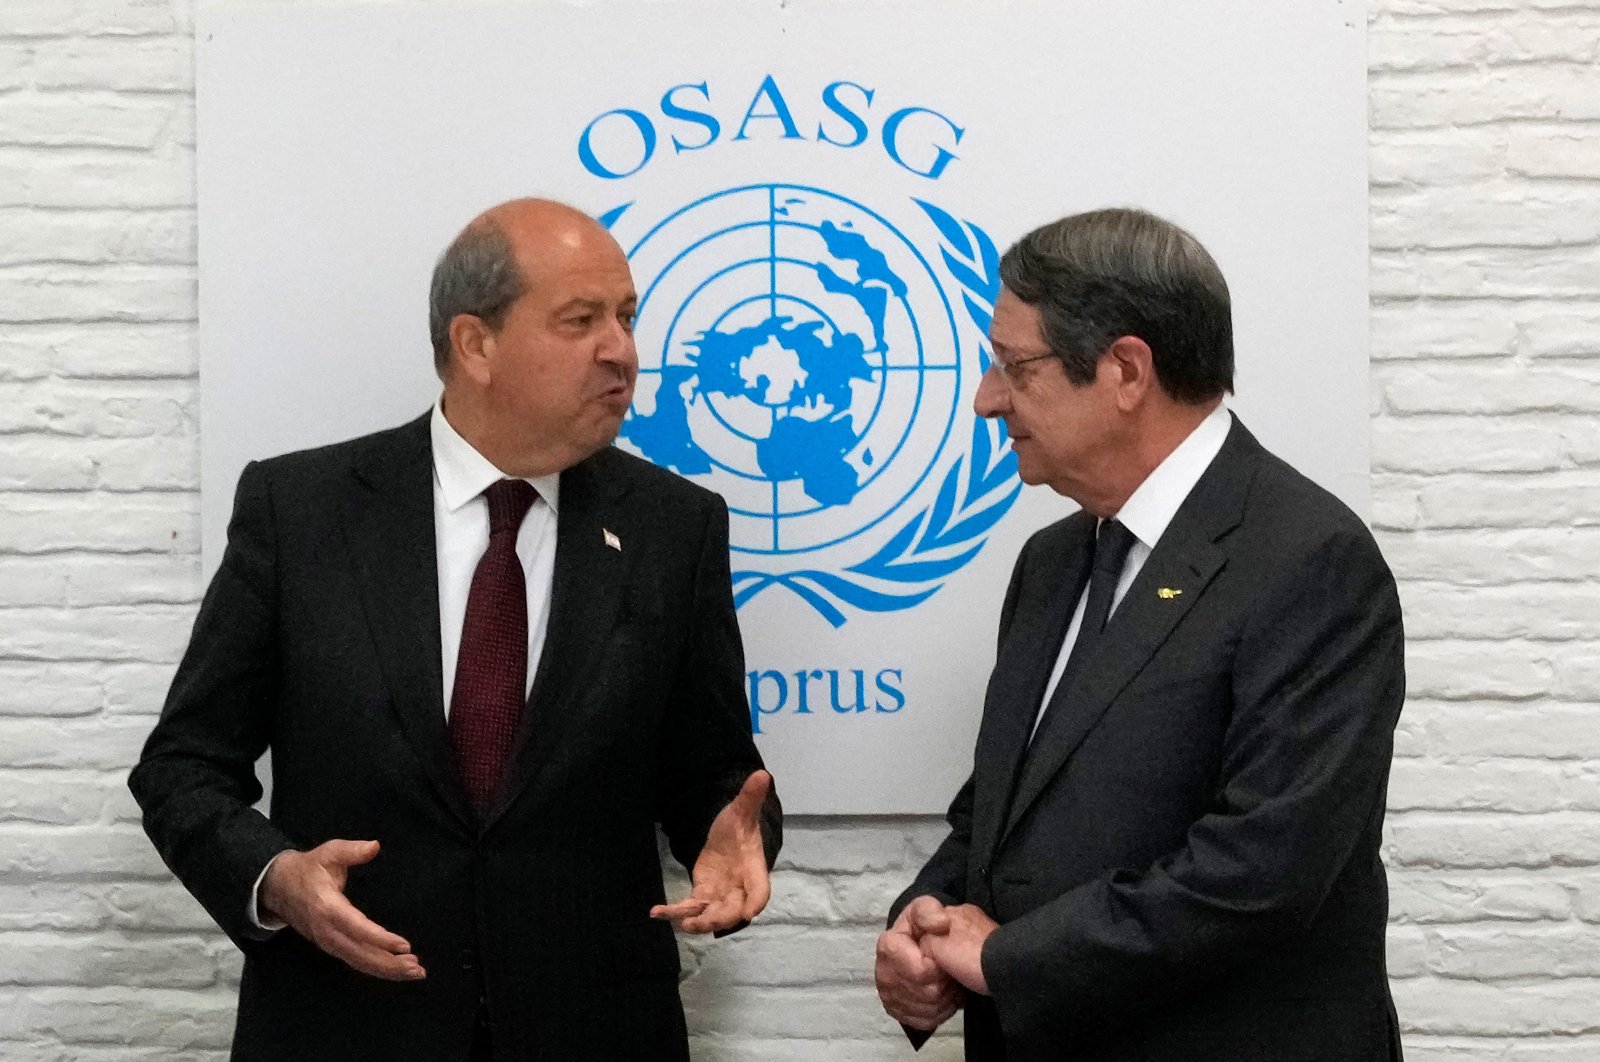 Turkish Cypriot President Ersin Tatar (L) and Greek Cypriot leader Nicos Anastasiades meet at an event hosted by the United Nations in the buffer zone area, in Lefkoşa (Nicosia), Cyprus Island, April 13, 2022. (Reuters Photo)